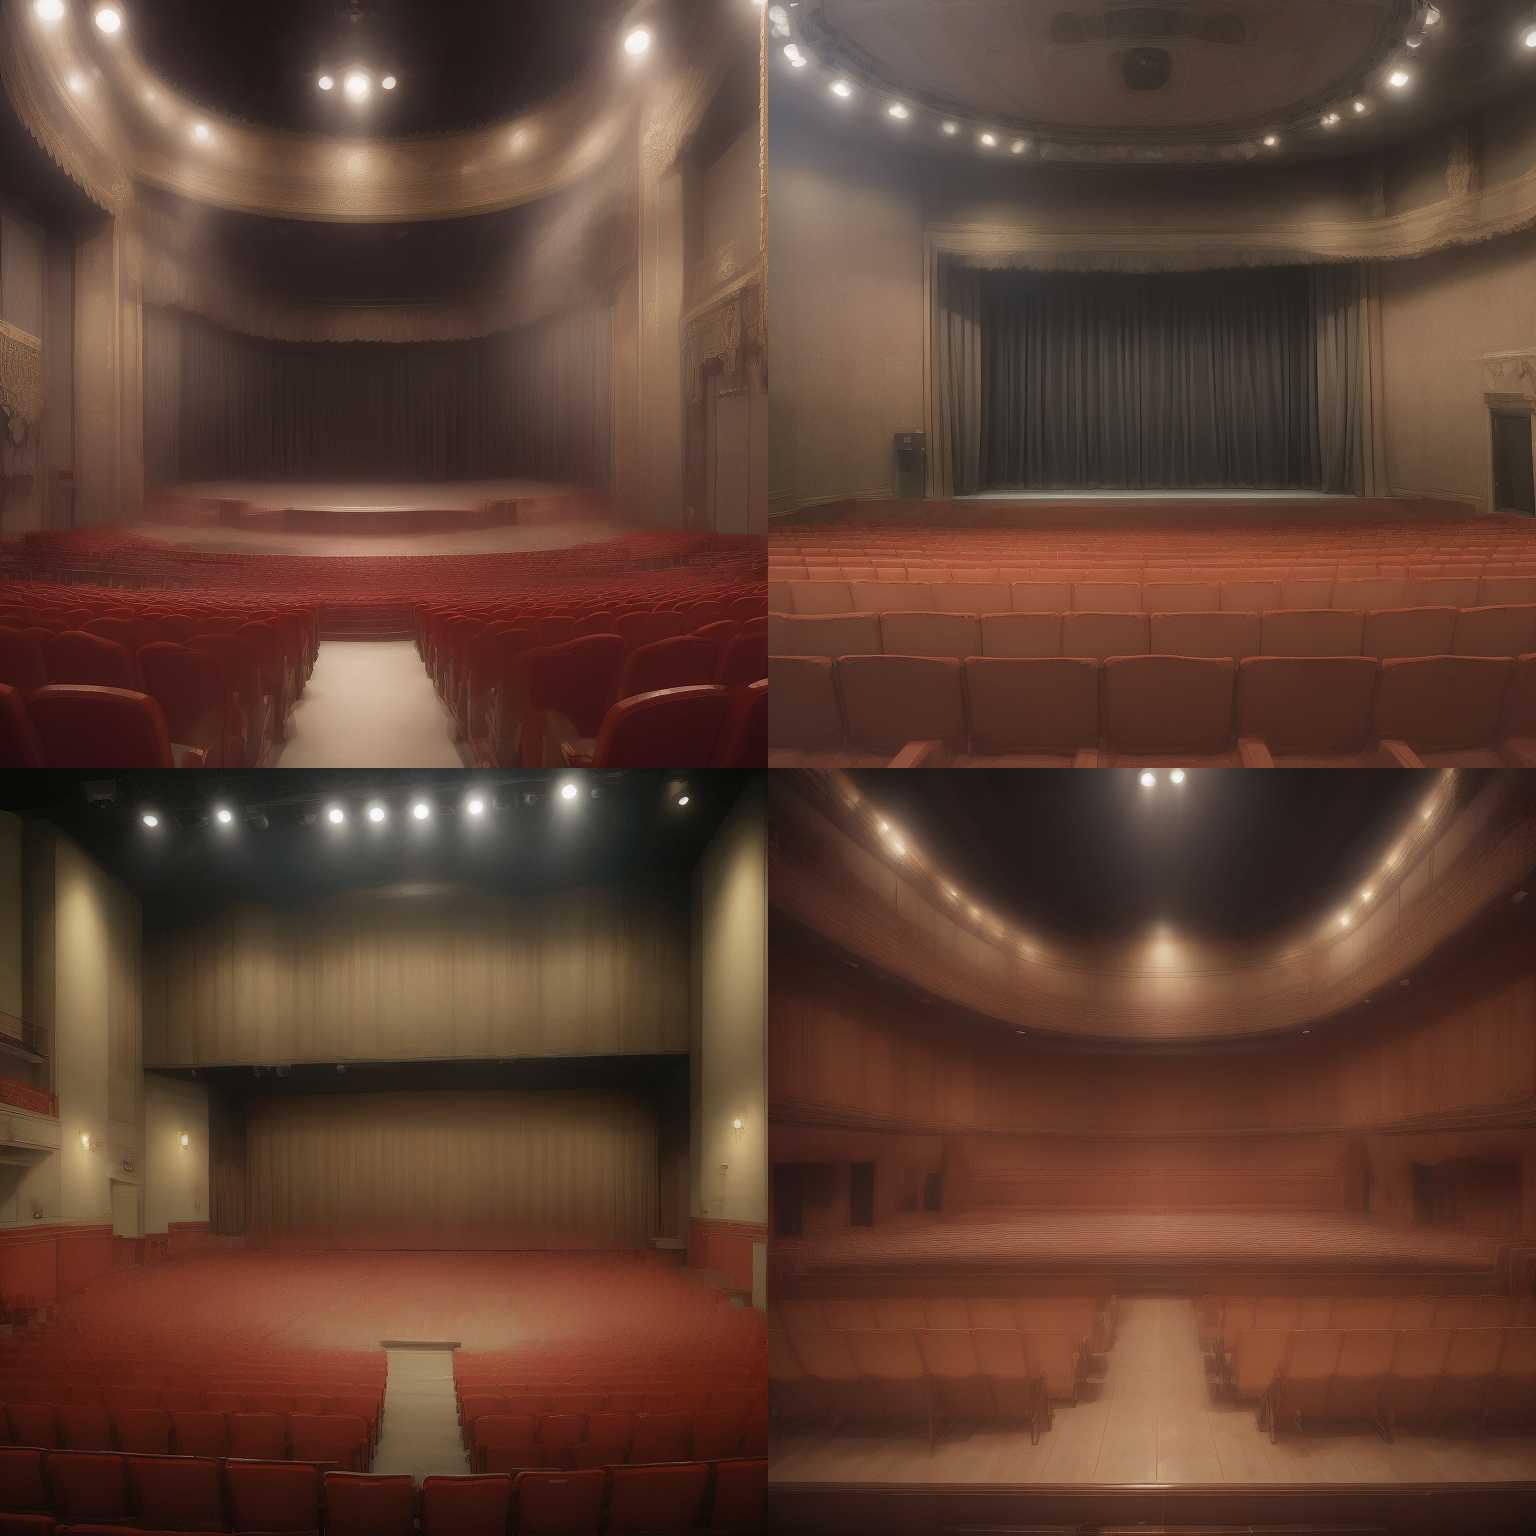 A theater stage during a scene change